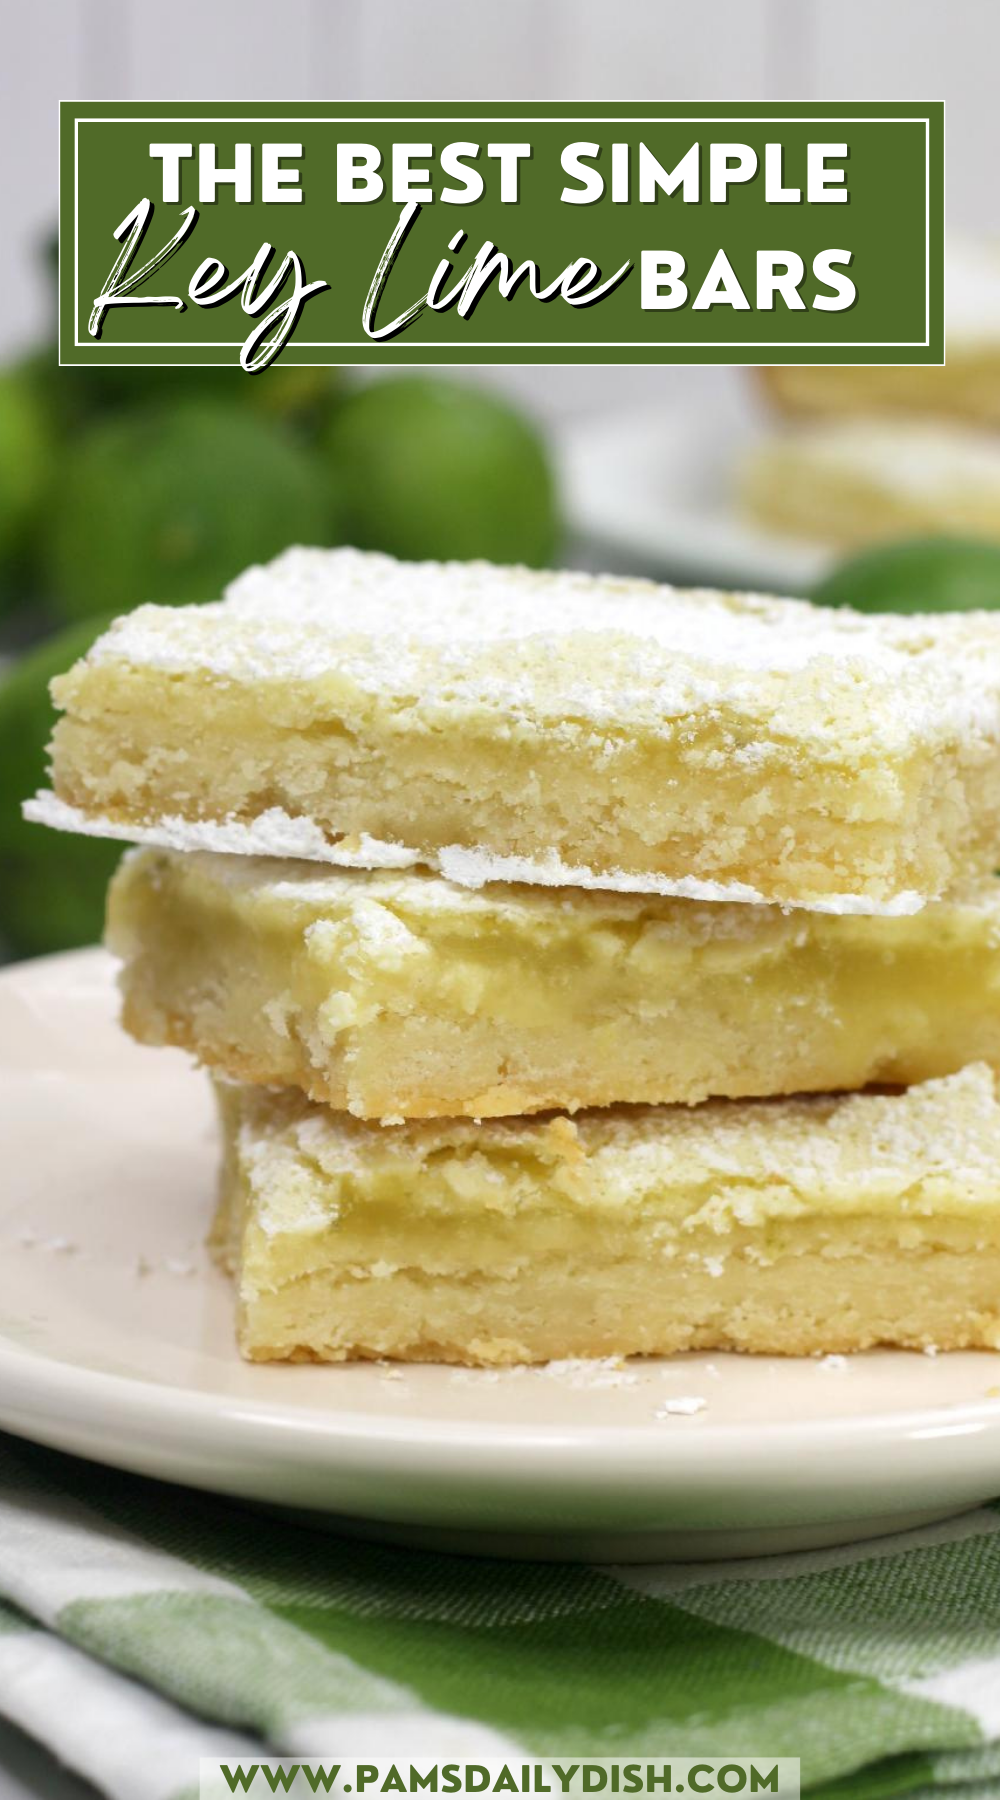 If you are a fan of key lime pie, you are sure to love these basic key lime bars. A simple dessert recipe that’s easy to follow and comes out tasting fabulous! These are simply the best key lime bars! So easy and so simple to make but oh so delicious. A family favorite for sure and so perfect for picnics and potlucks. via @skinnydesserts